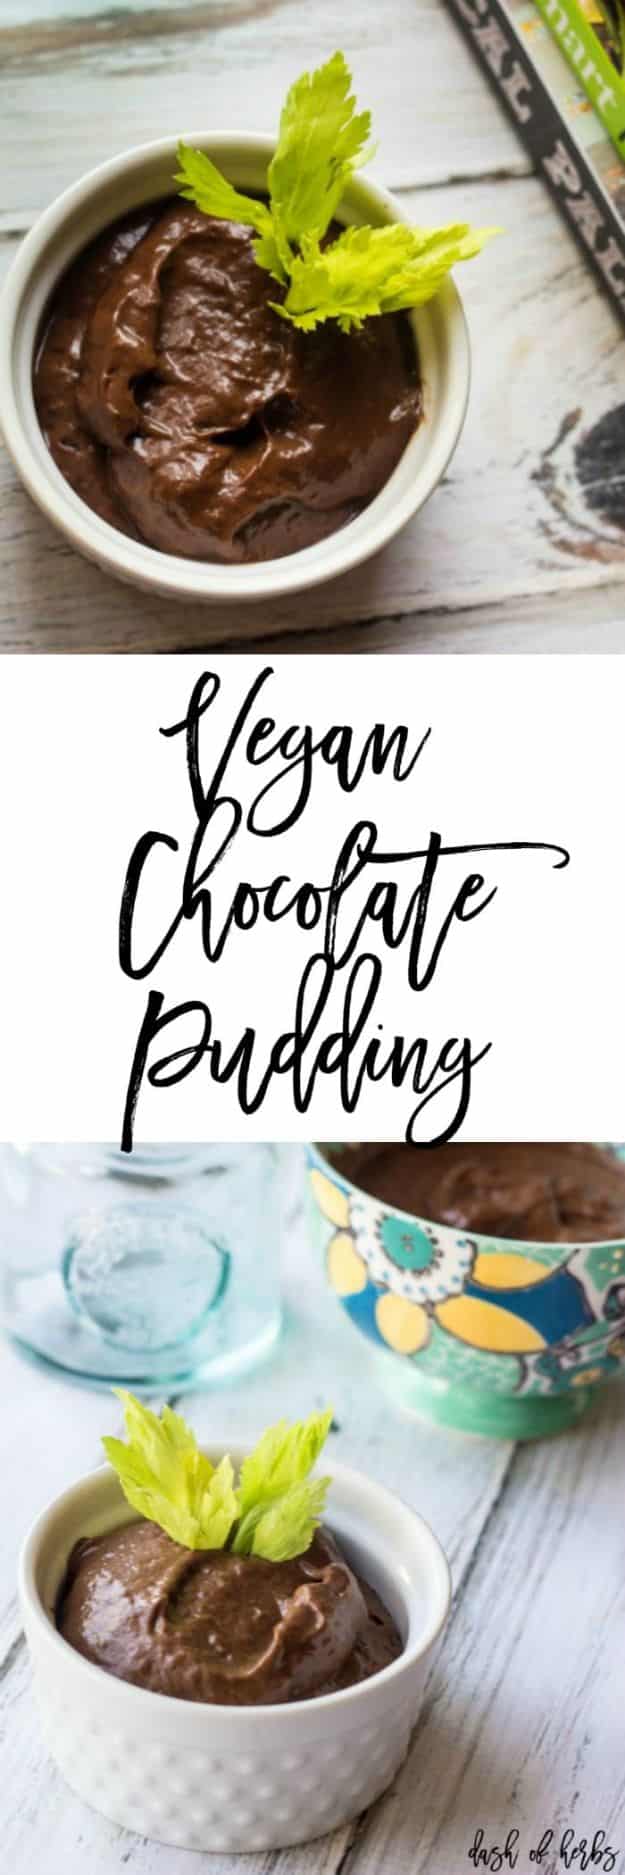 Low Sugar Dessert Recipes - Vegan Chocolate Pudding - Healthy Desserts and Ideas for Healthy Sweets Without Much Sugar - Raw Foods and Easy Clean Eating Dessert Tips, Keto Diet Snacks - Chocolate, Gluten Free, Cakes, Fruit Dips, No Bake, Stevia and Sweetener Options - Diabetic Diets and Diabetes Recipe Ideas for Desserts #recipes #recipeideas #lowsugar #nosugar #lowcalorie #diyjoy #dessertrecipes #lowsugar #dietrecipes